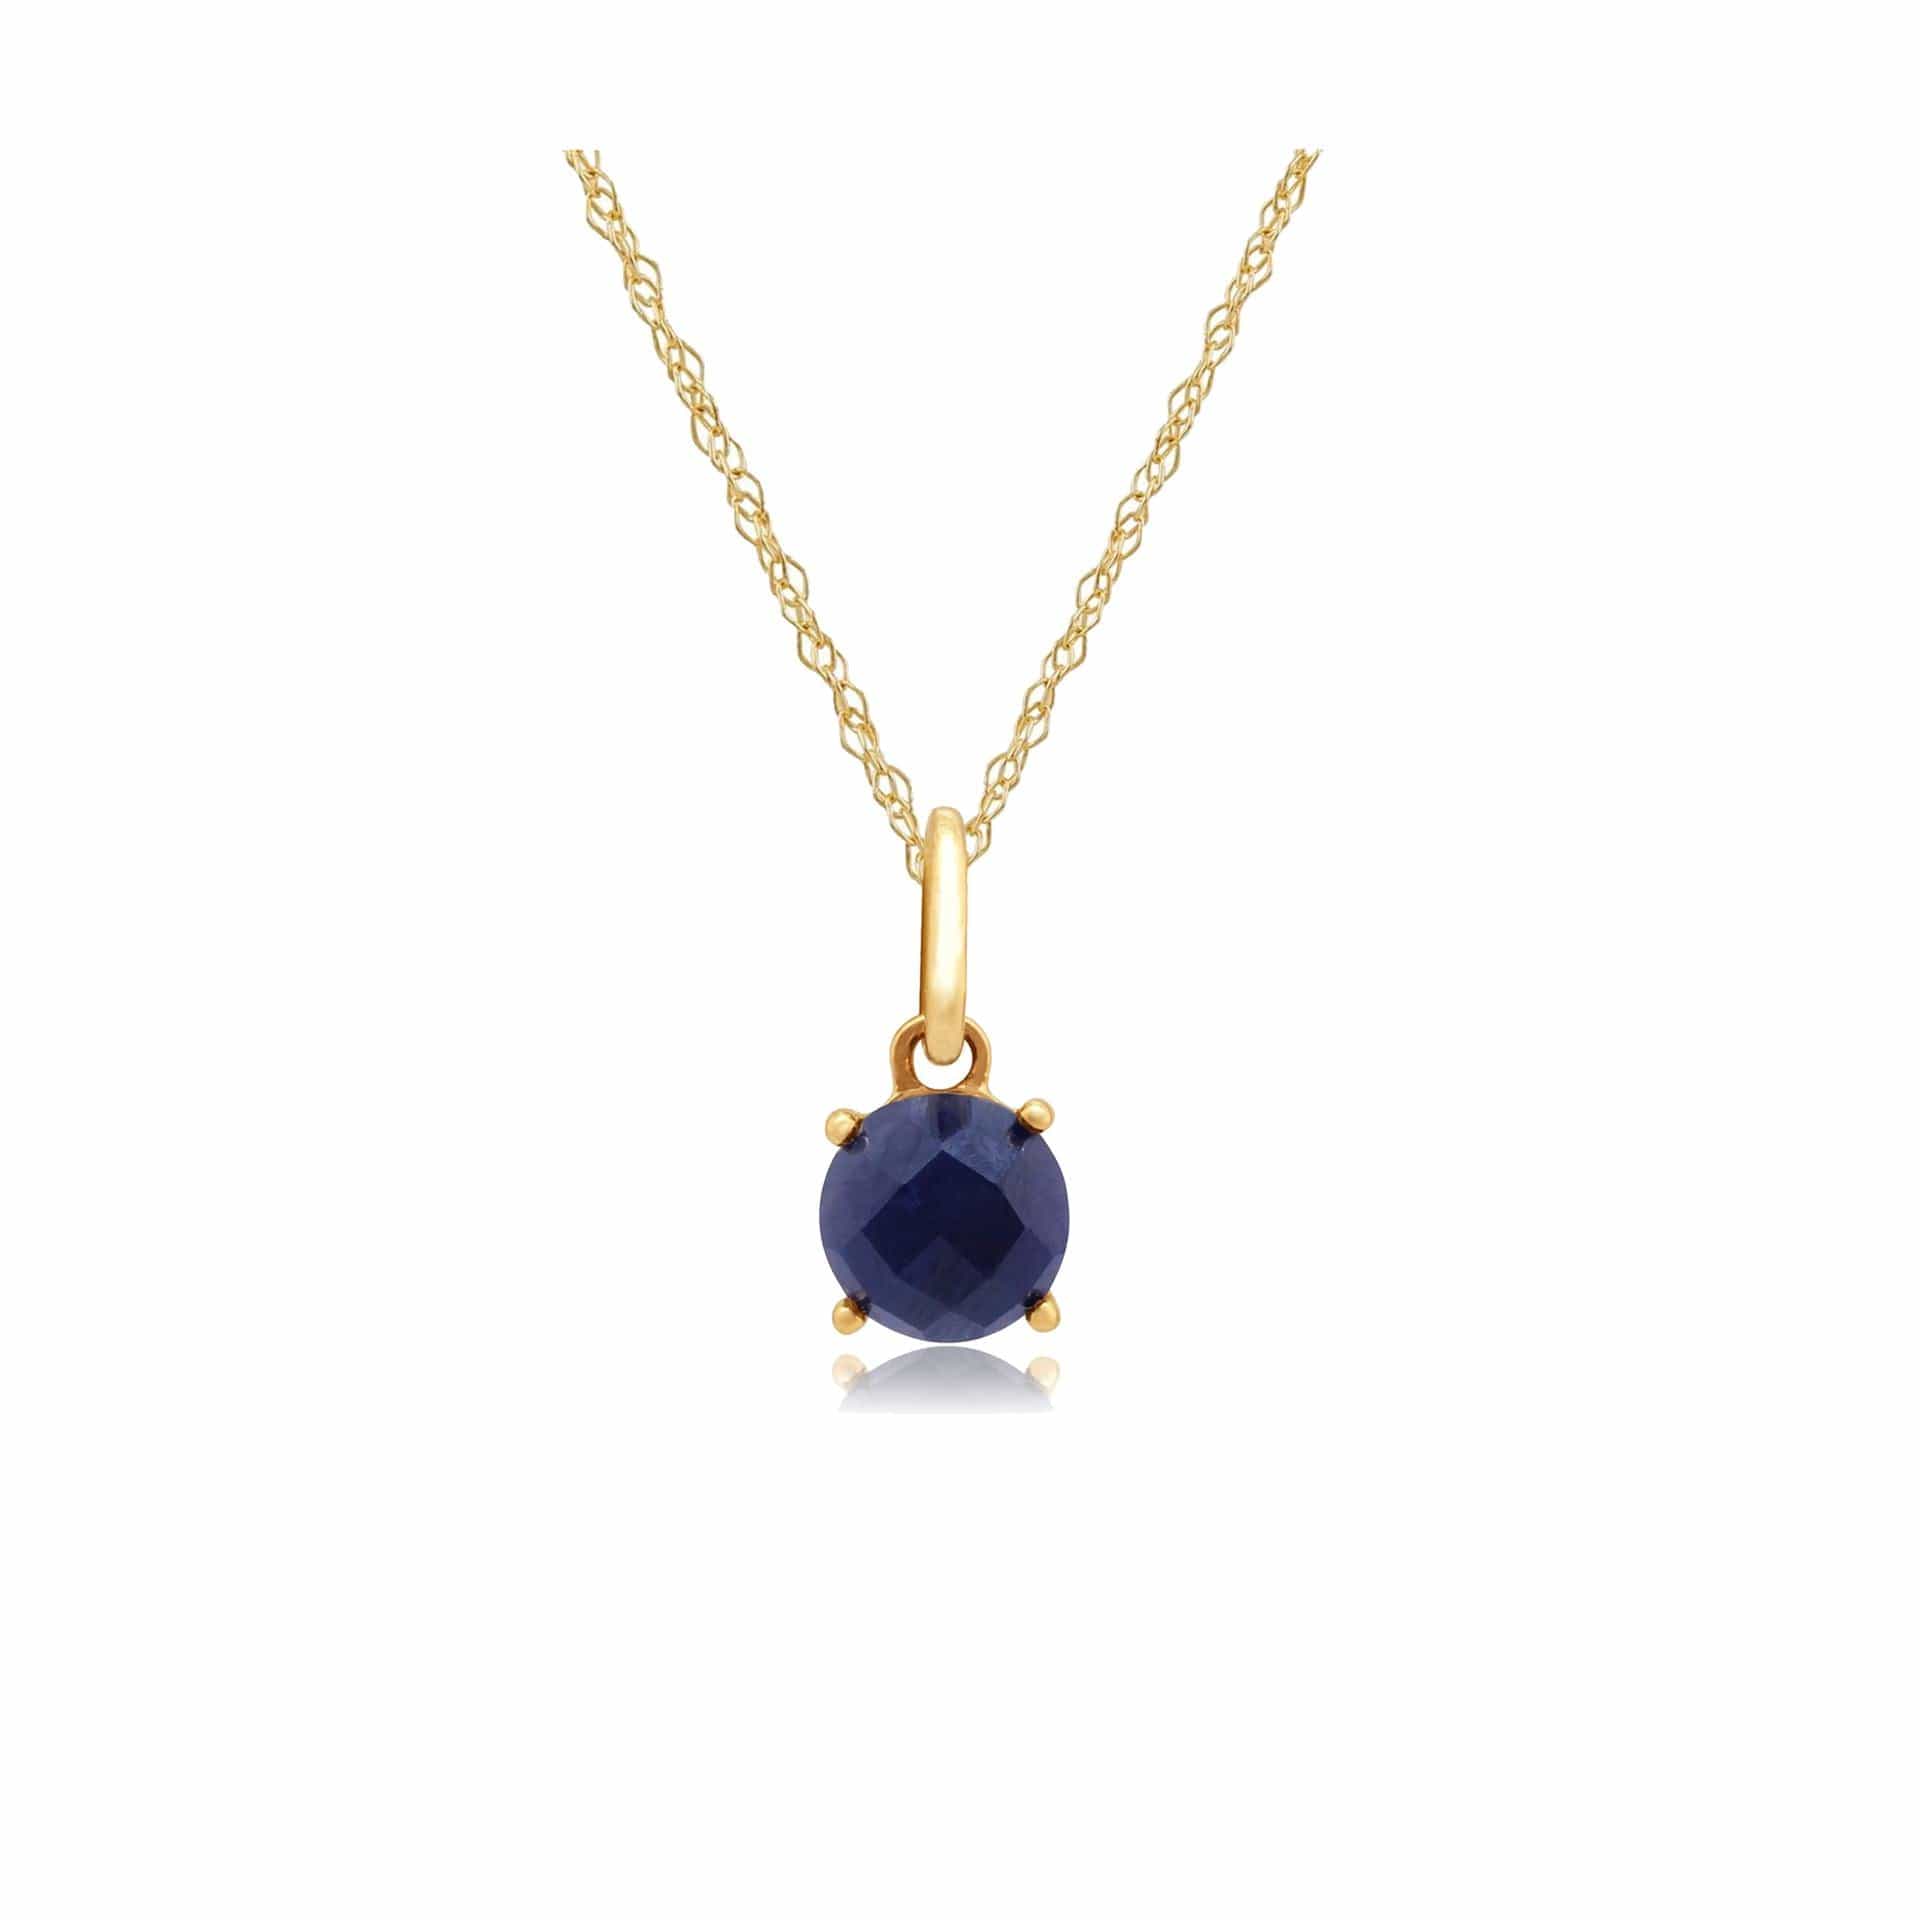 Photos - Pendant / Choker Necklace Classic Round Sapphire Checkerboard Pendant in 9ct Yellow Gold